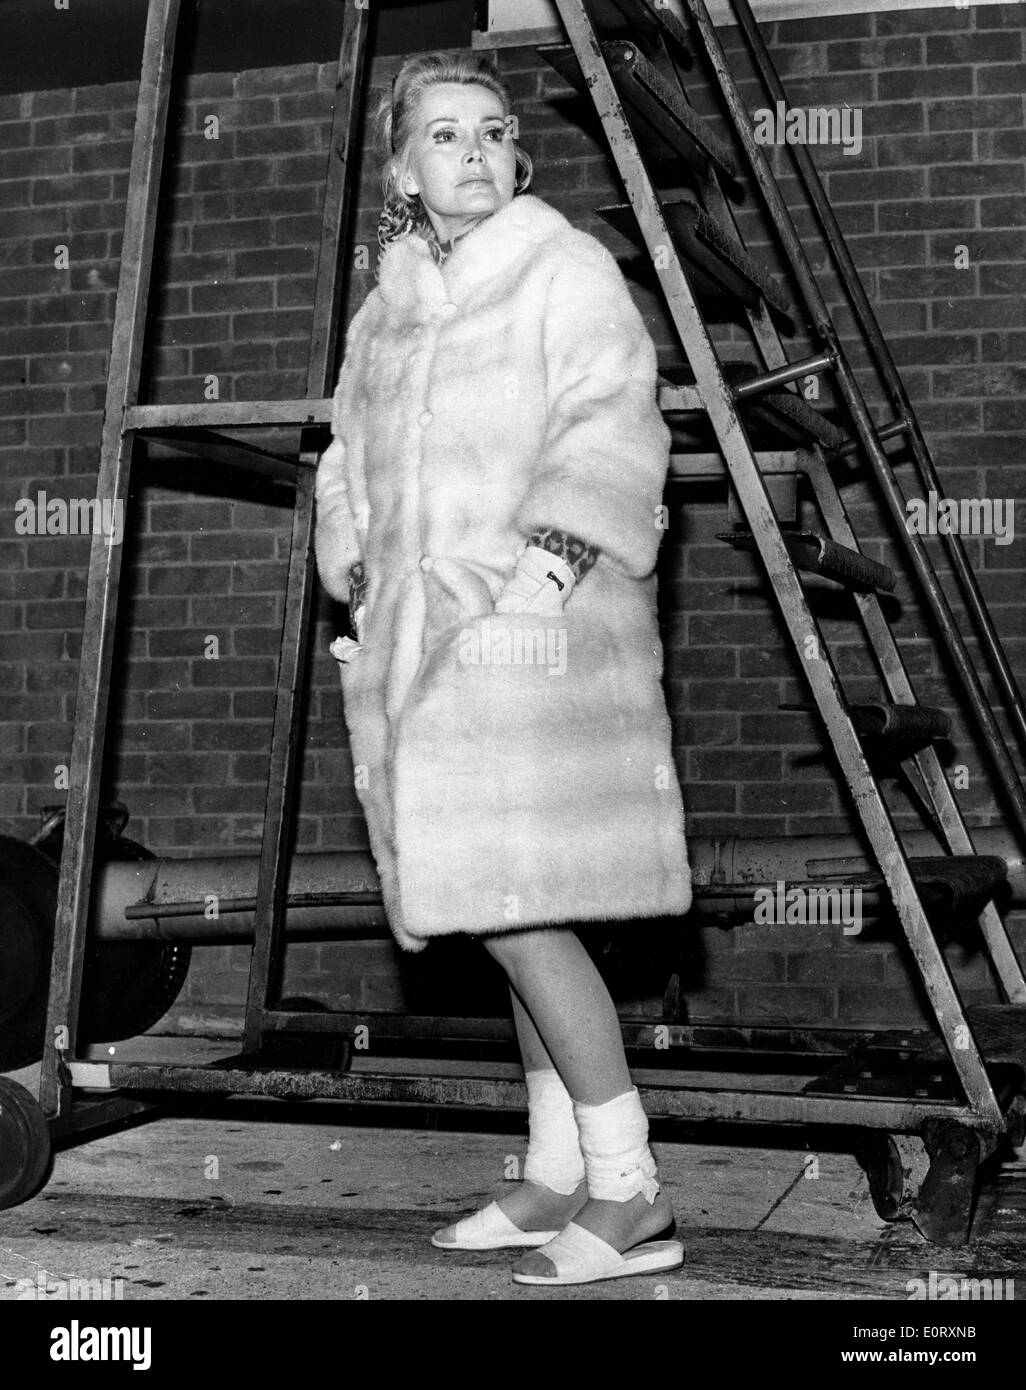 Actress Zsa Zsa Gabor on set of a film Stock Photo